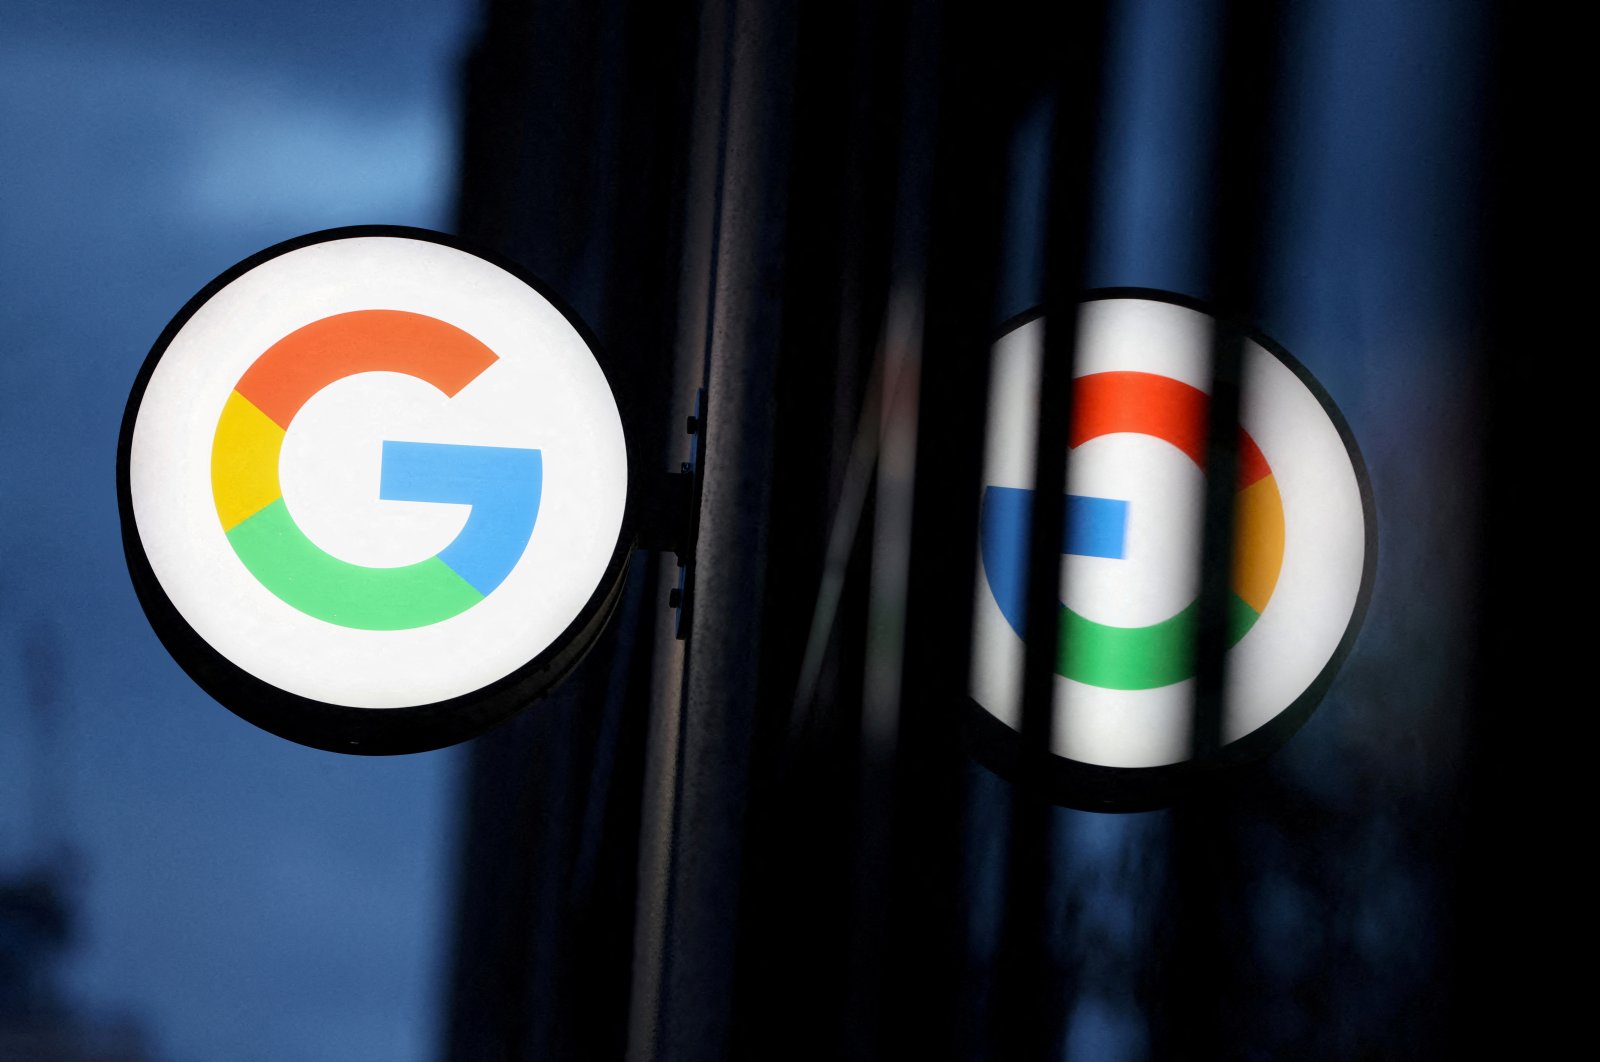  The logo for Google LLC is seen at the Google Store Chelsea in Manhattan, New York City, U.S., Nov. 17, 2021. (REUTERS/Andrew Kelly/File Photo)